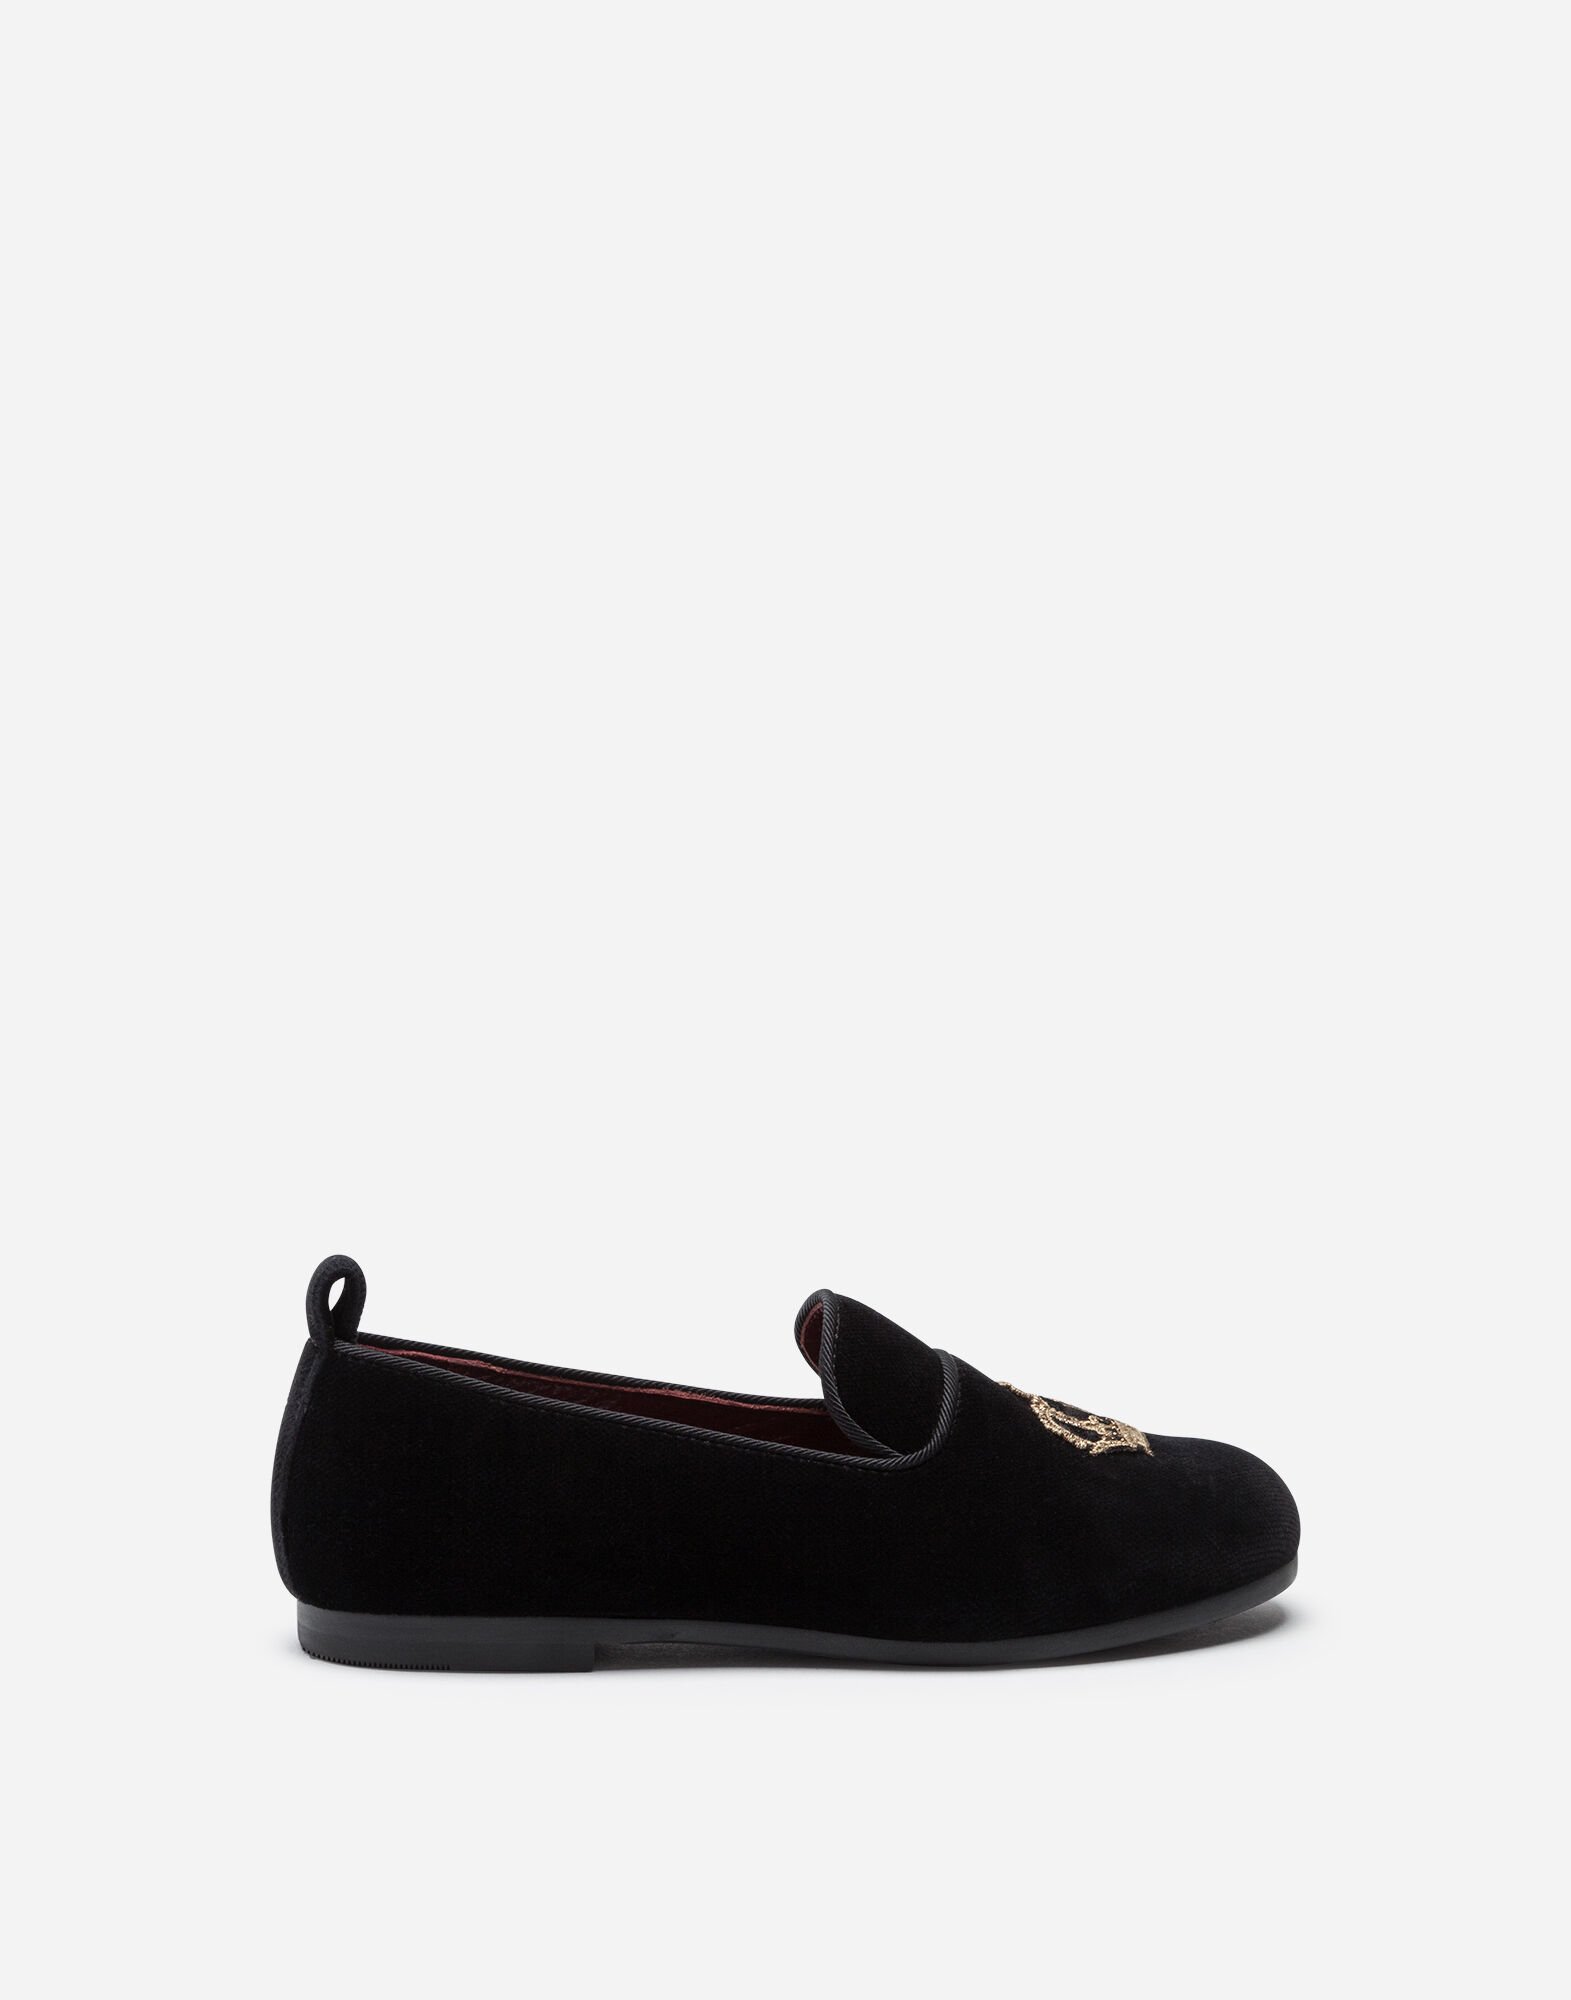 Dolce & Gabbana Velvet slippers with crown patch Black EB0003AB000